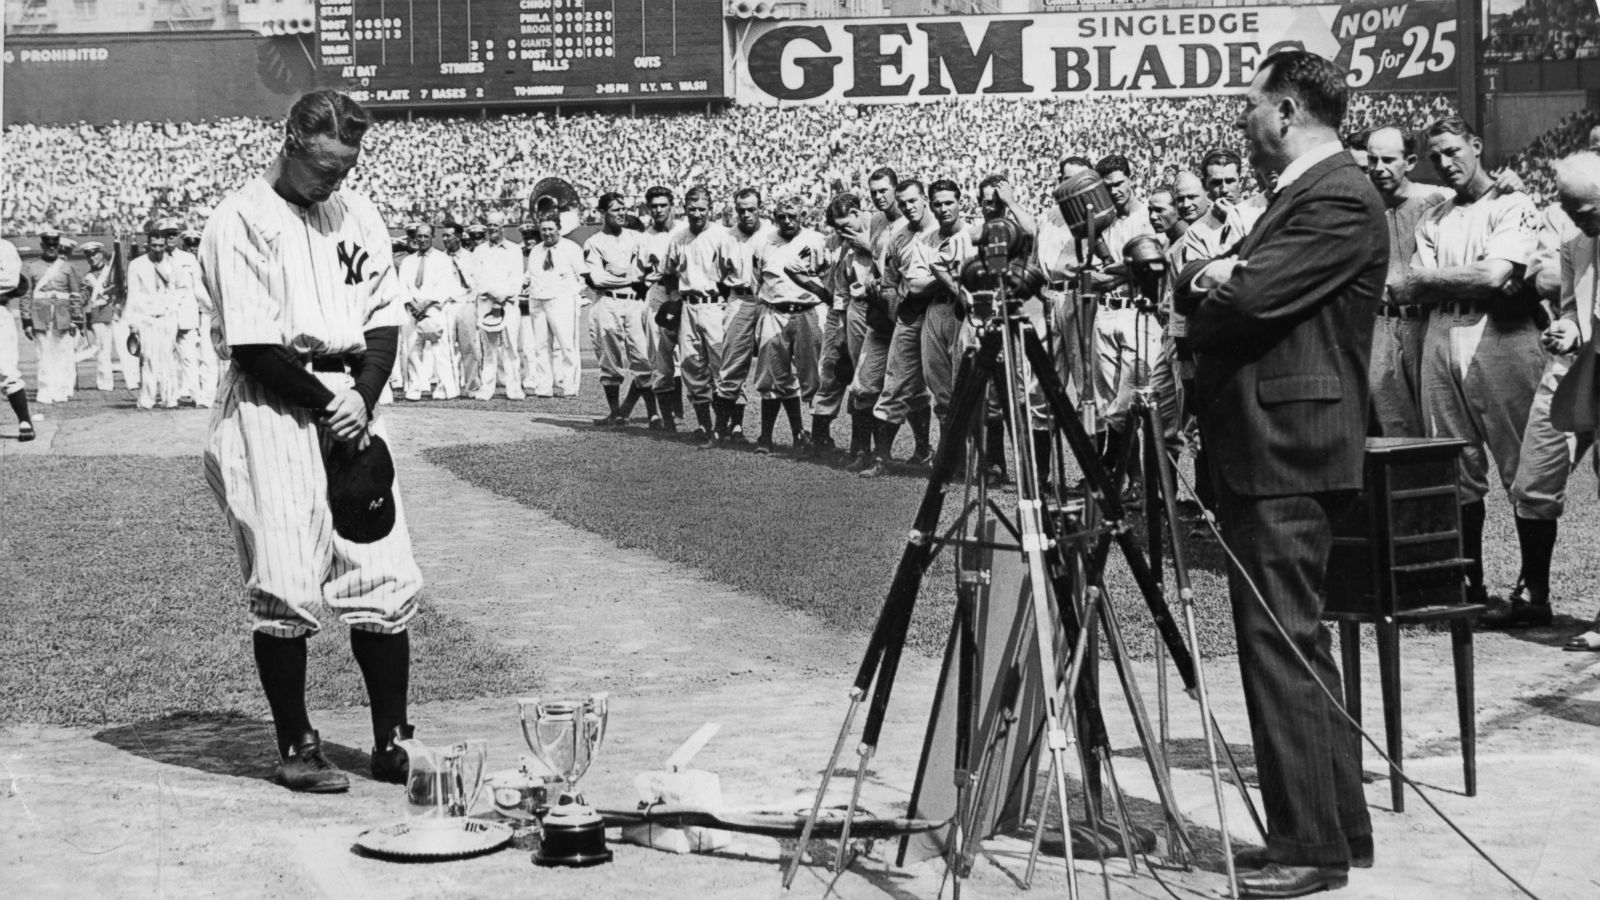 Lou Gehrig speech: What did he say and why is Lou Gehrig disease